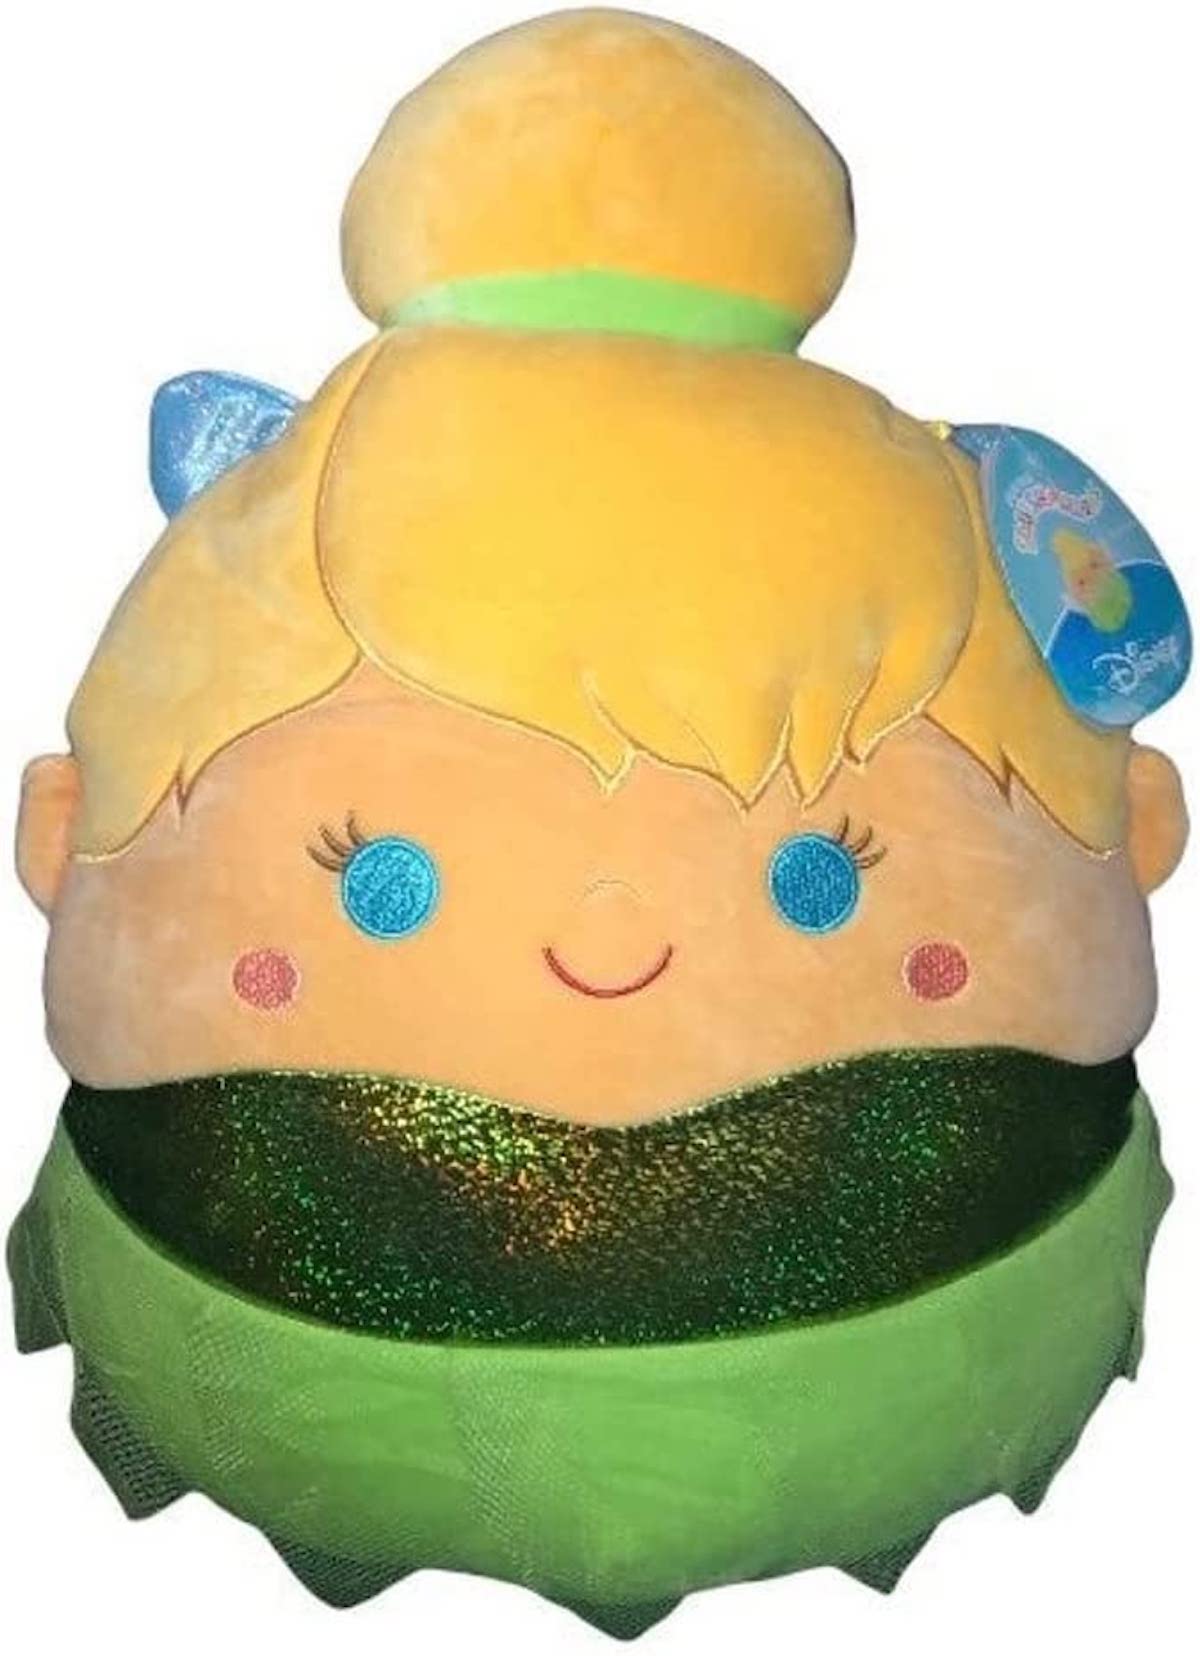 Tinkerbell Squishmallow, with blonde hair piled on top of her head, blue eyes and a sparkly green dress.